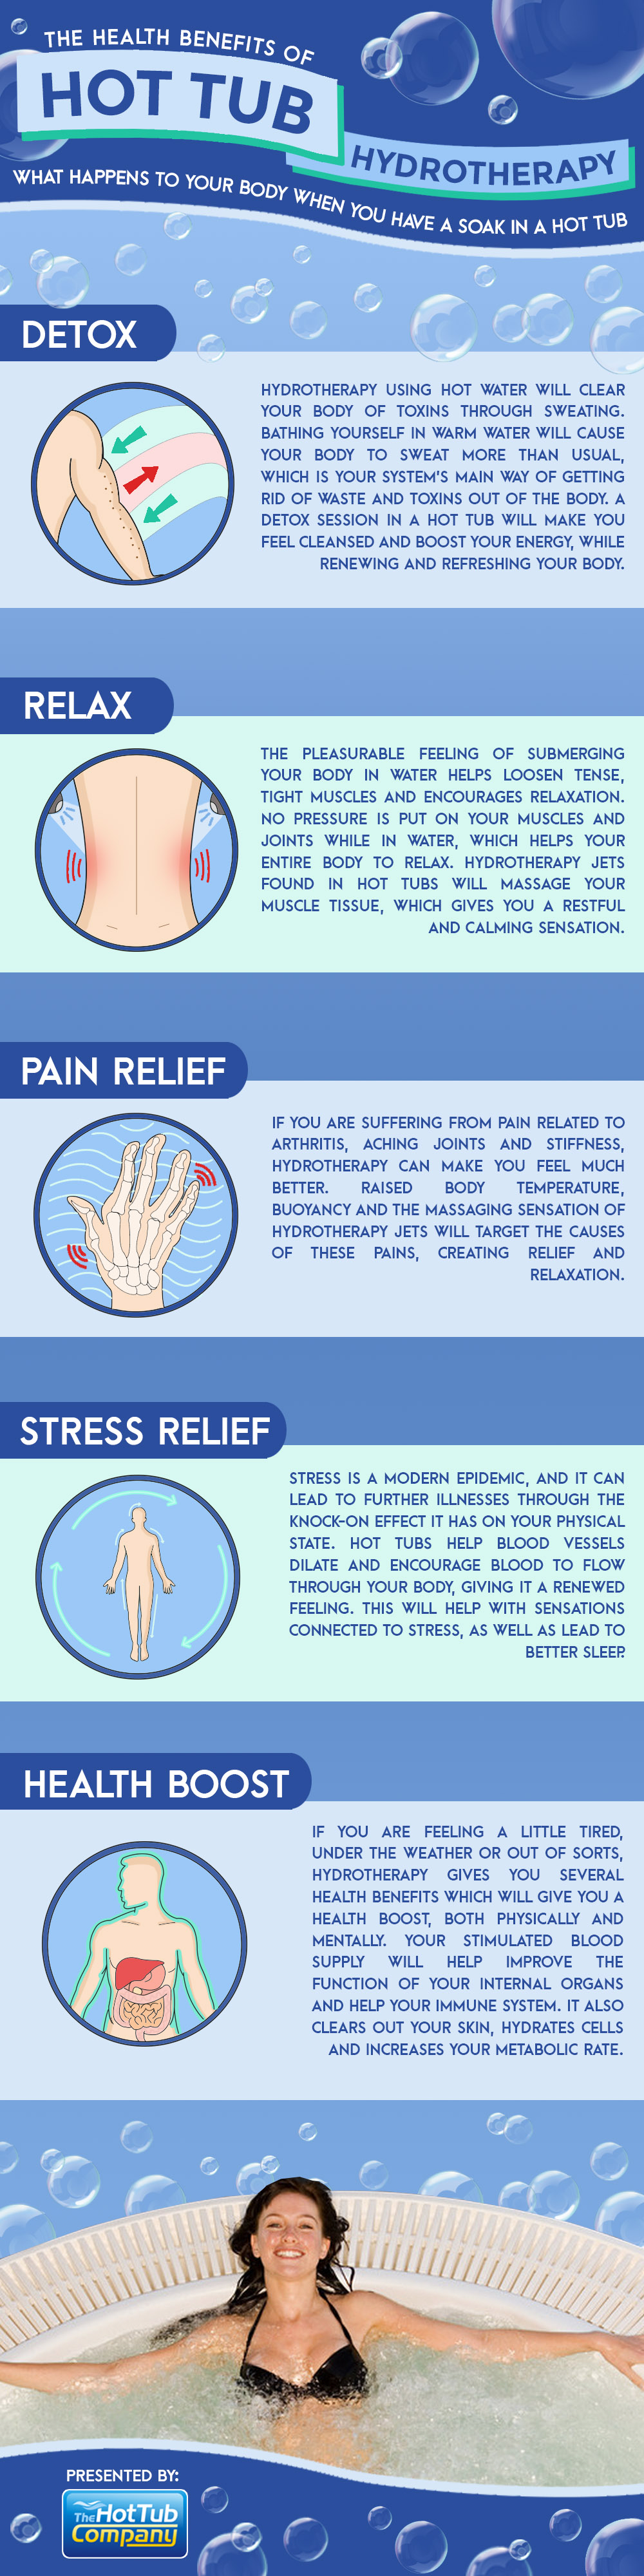 Hot Tub Hydrotherapy: What It Does To Your Body Infographic